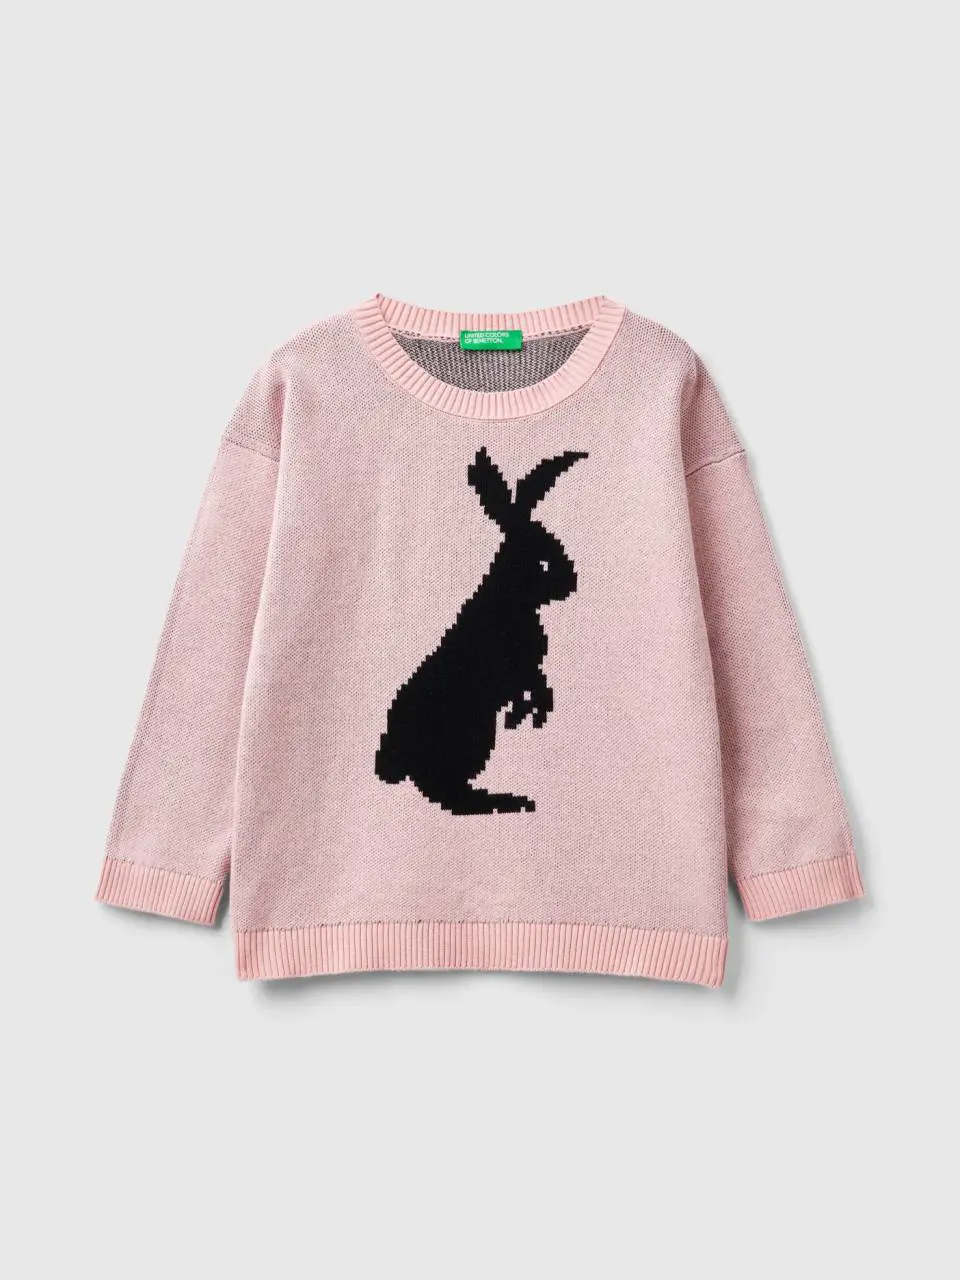 Benetton sweater with bunny design. 1